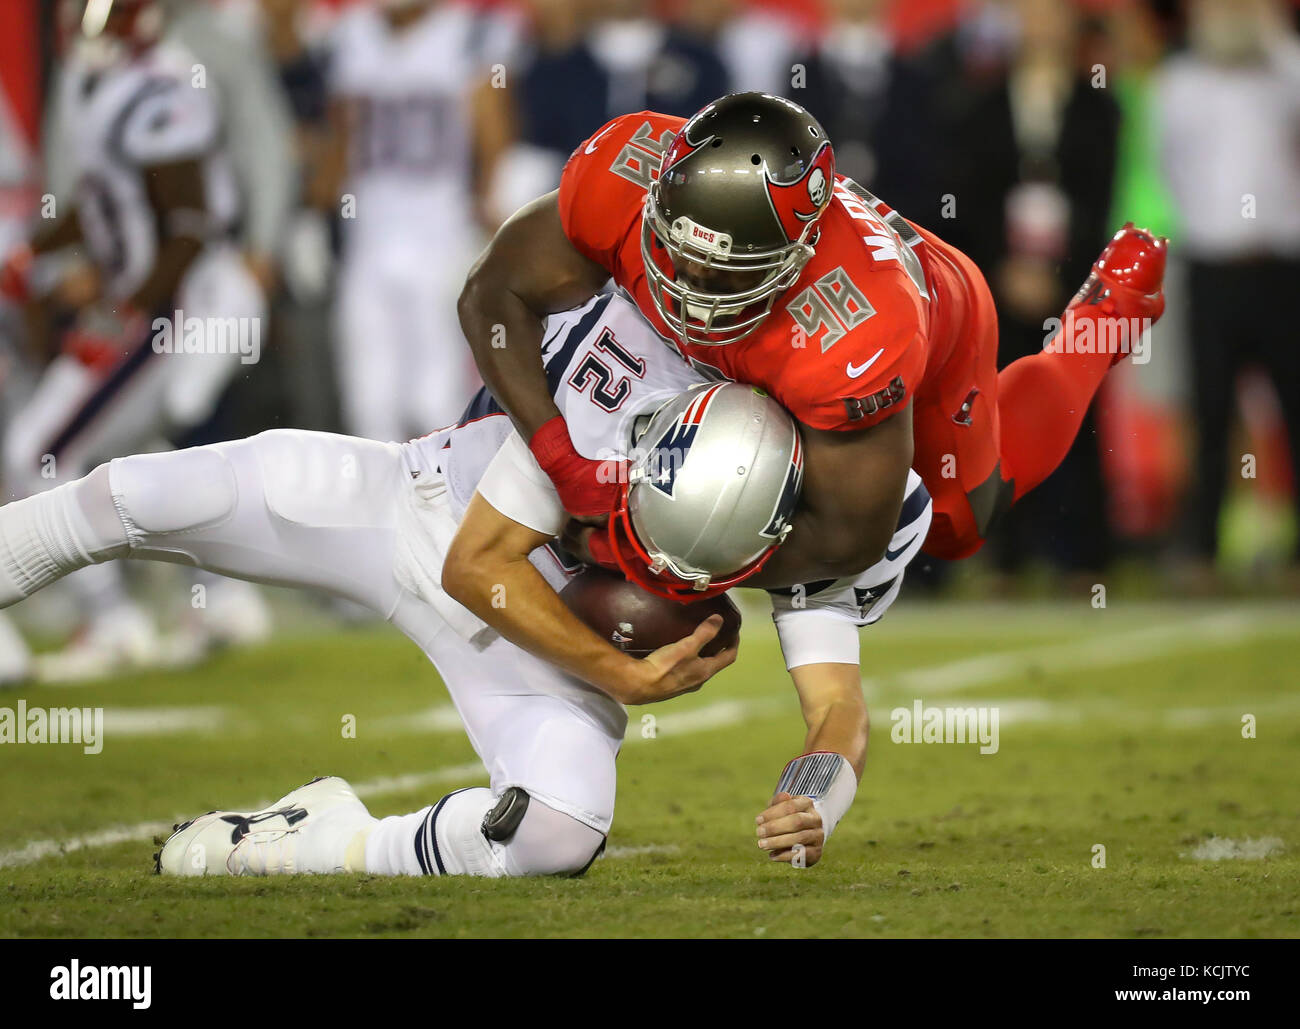 Tampa, Florida, USA. 5th Oct, 2017. MONICA HERNDON | Times.New England Patriots quarterback Tom Brady (12) wrapped up by Tampa Bay Buccaneers defensive tackle Clinton McDonald (98) in the first quarter of the Tampa Bay Buccaneers game against the New England Patriots on October 5, 2017 at Raymond James Stadium in Tampa, Fla. Credit: Monica Herndon/Tampa Bay Times/ZUMA Wire/Alamy Live News Stock Photo